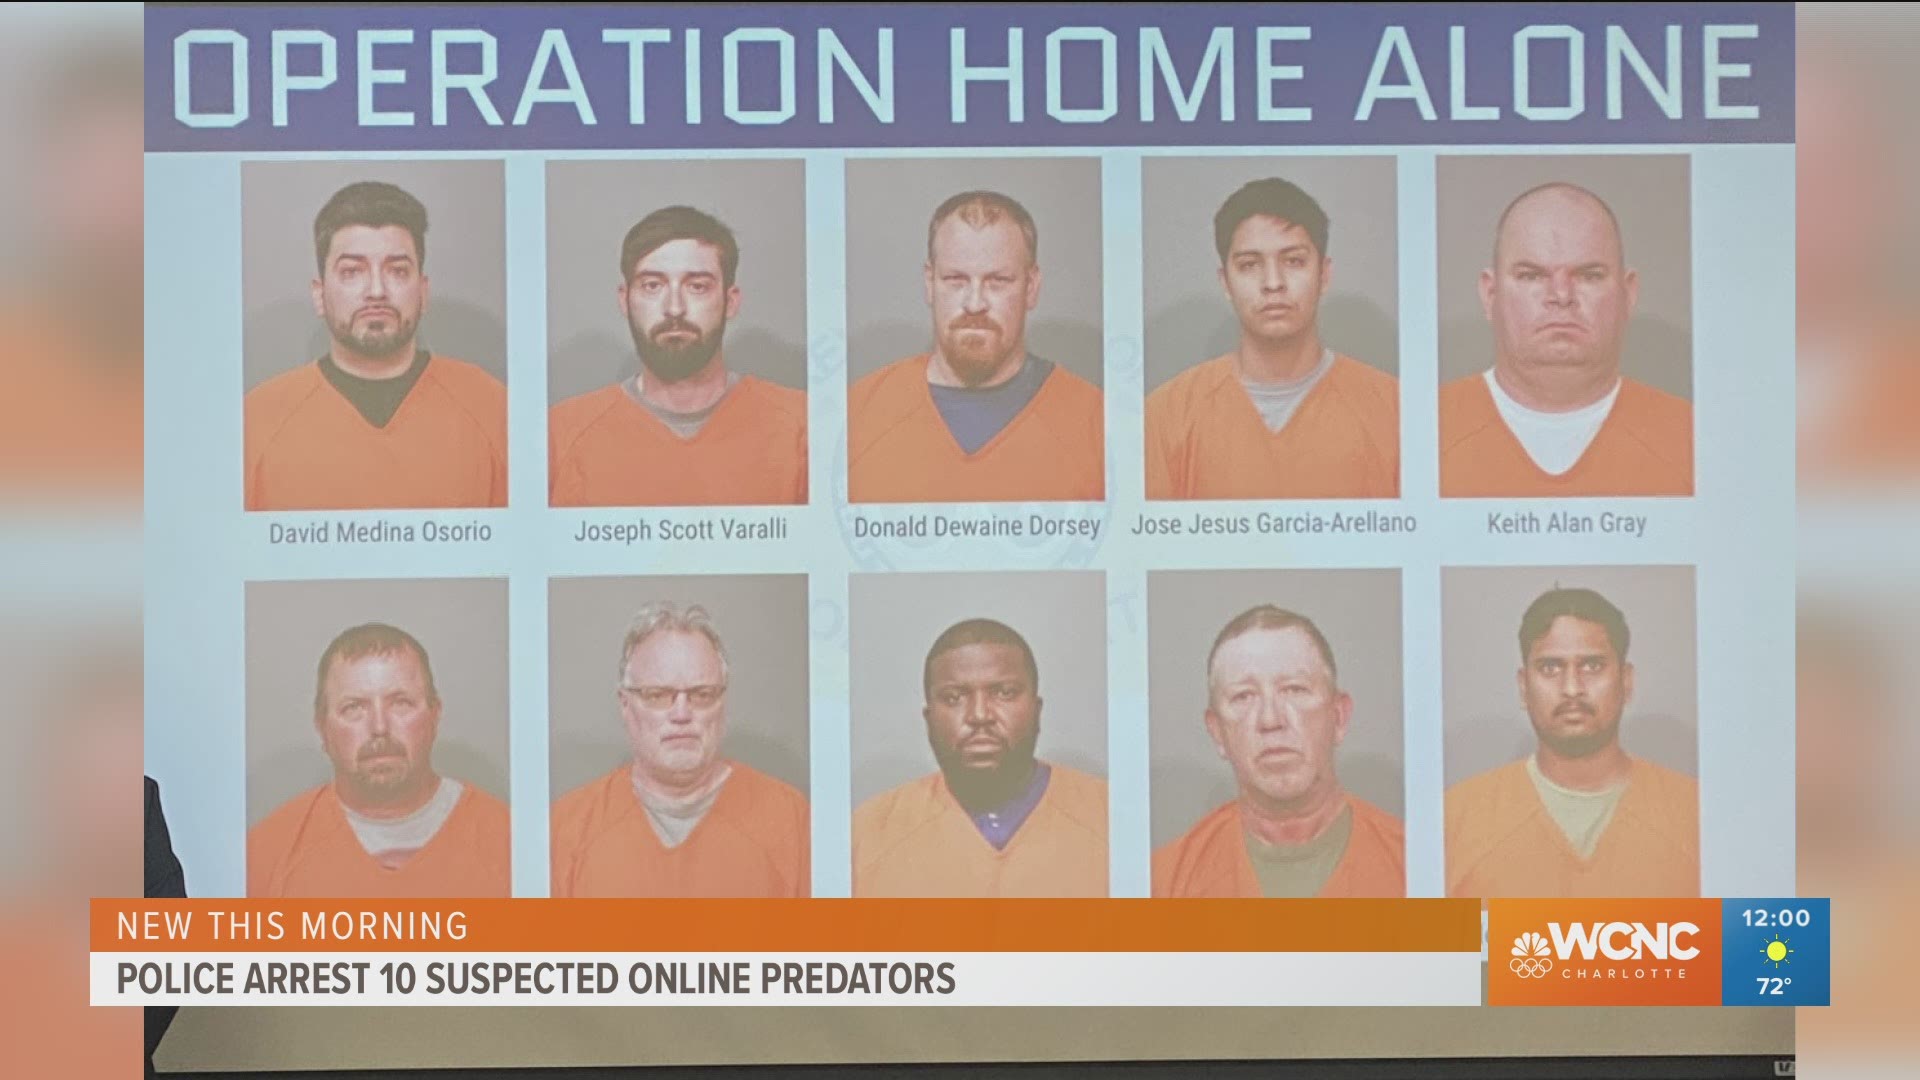 Police in South Carolina arrested 10 men in connection with an online predator sting operation.